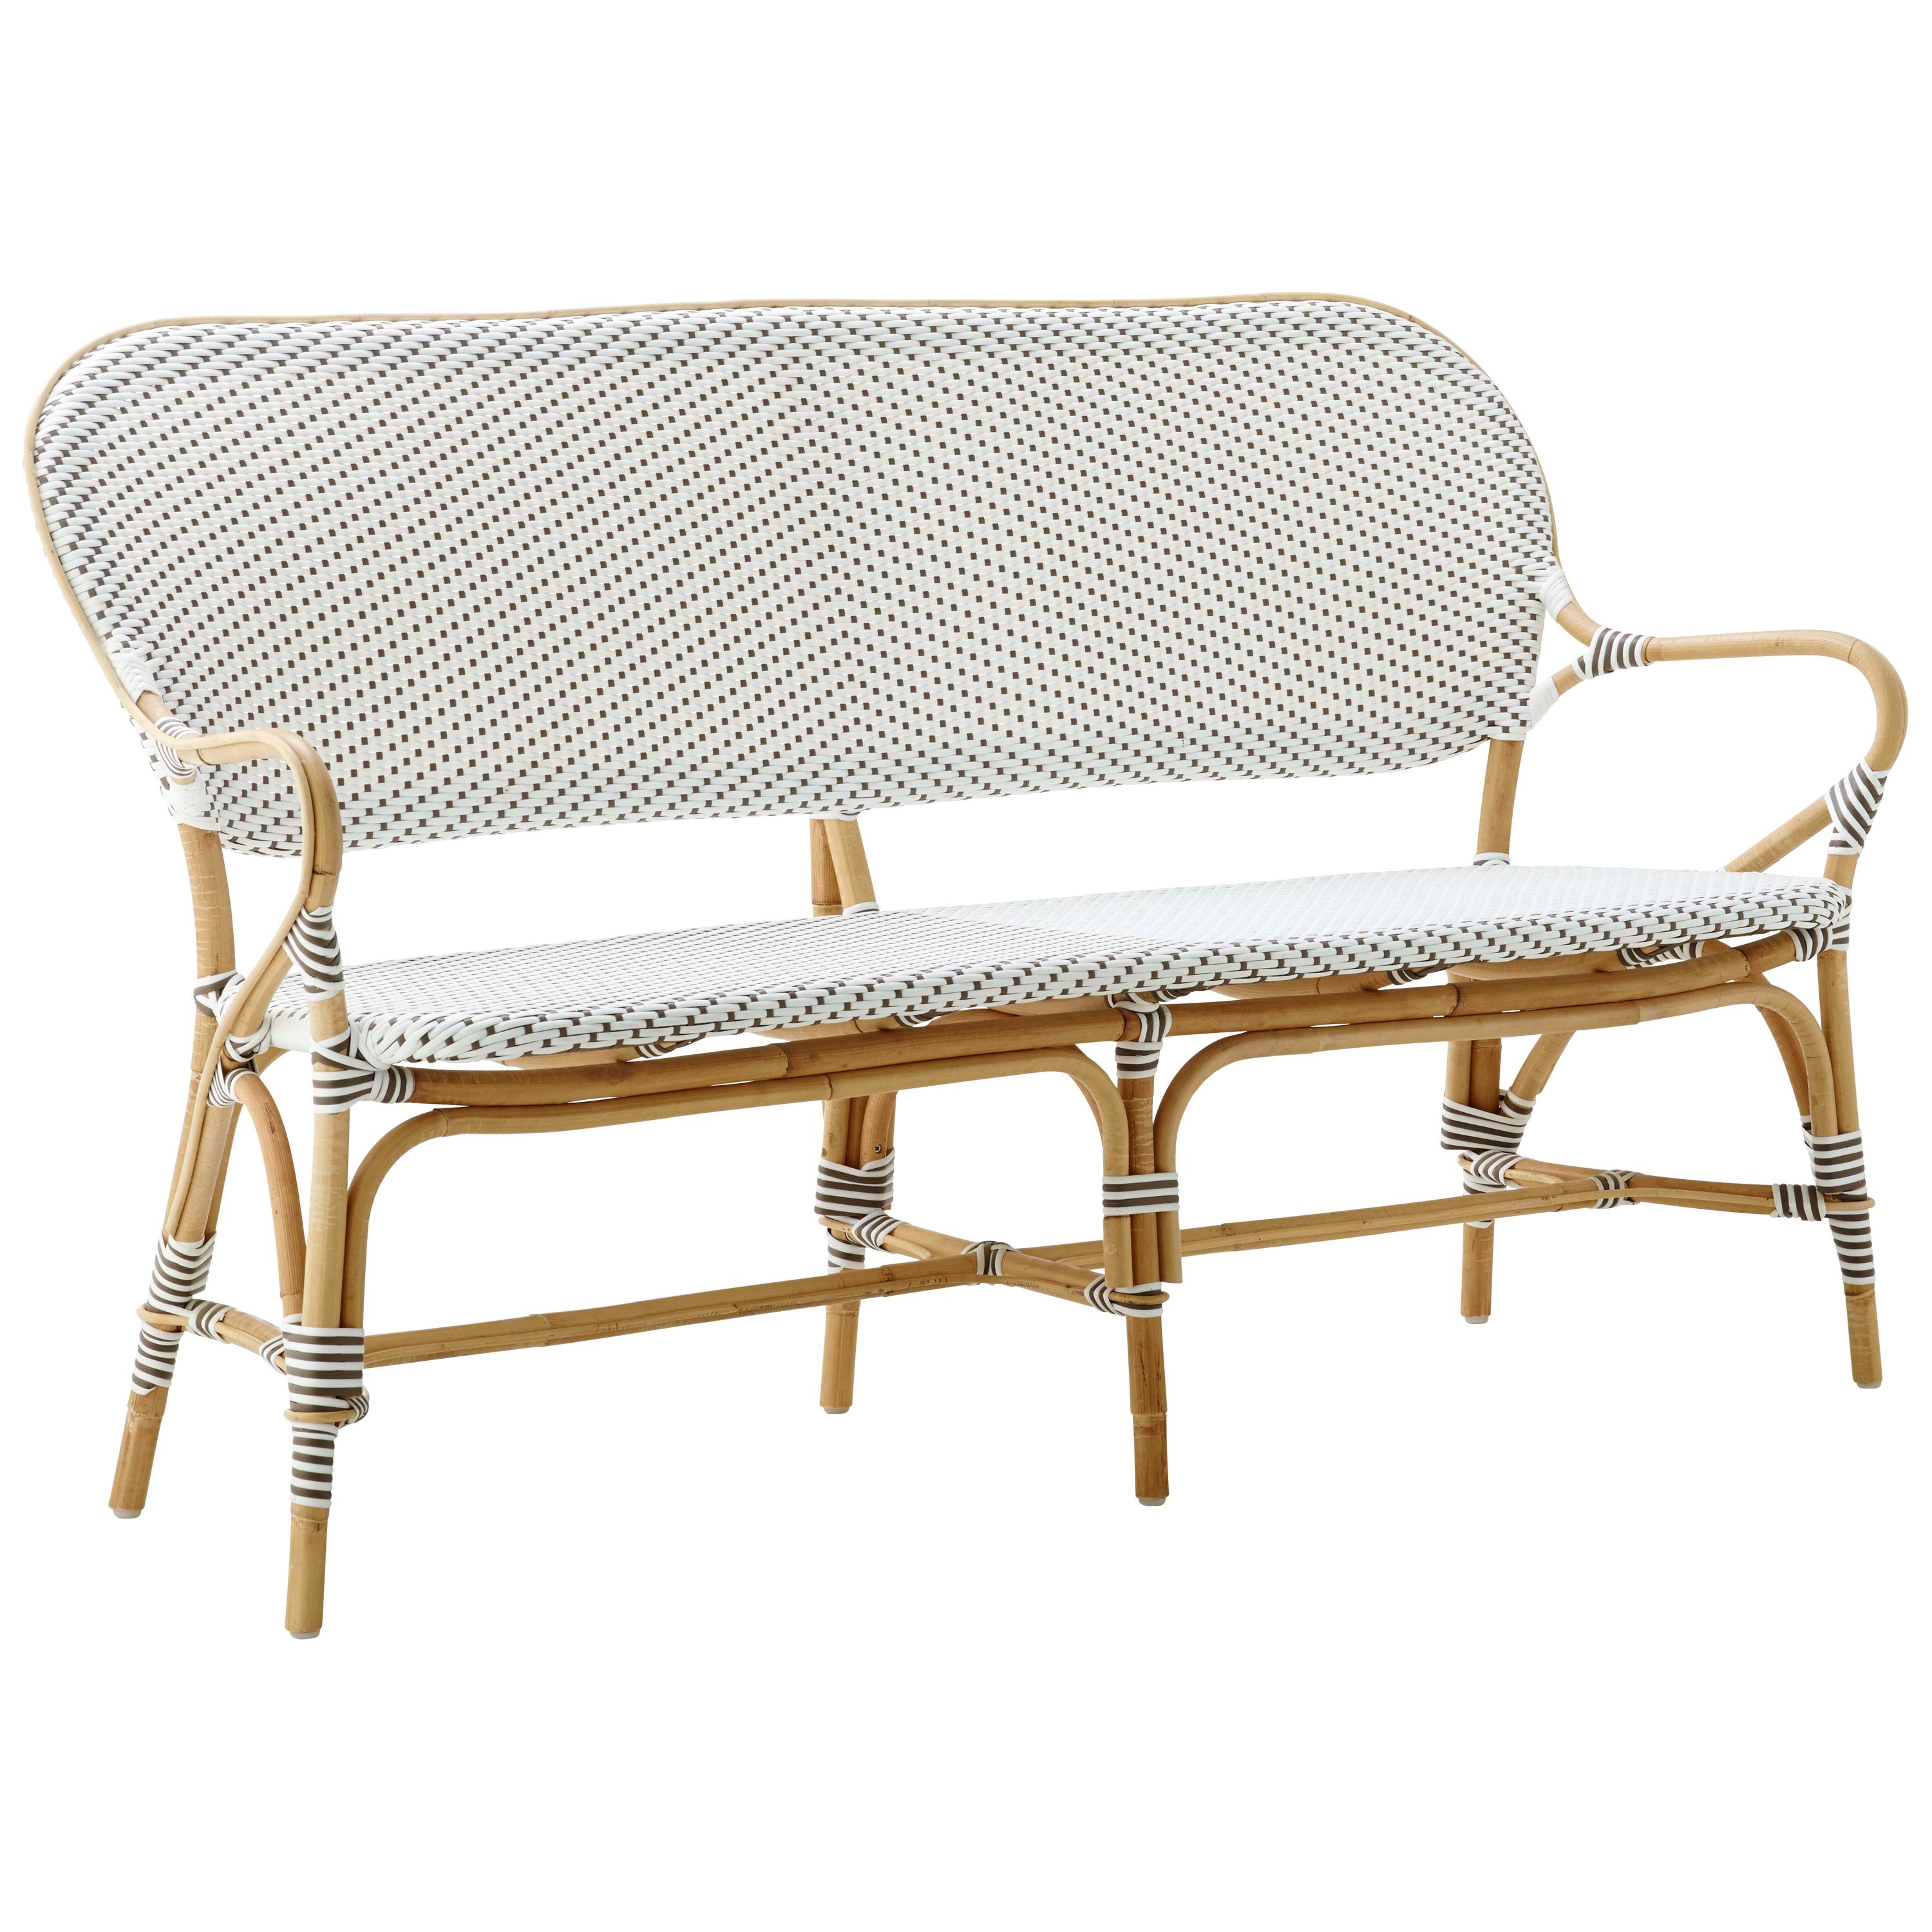 Sika Design Isabell Rattan Bistro Bench in White with Cappuccino Dots